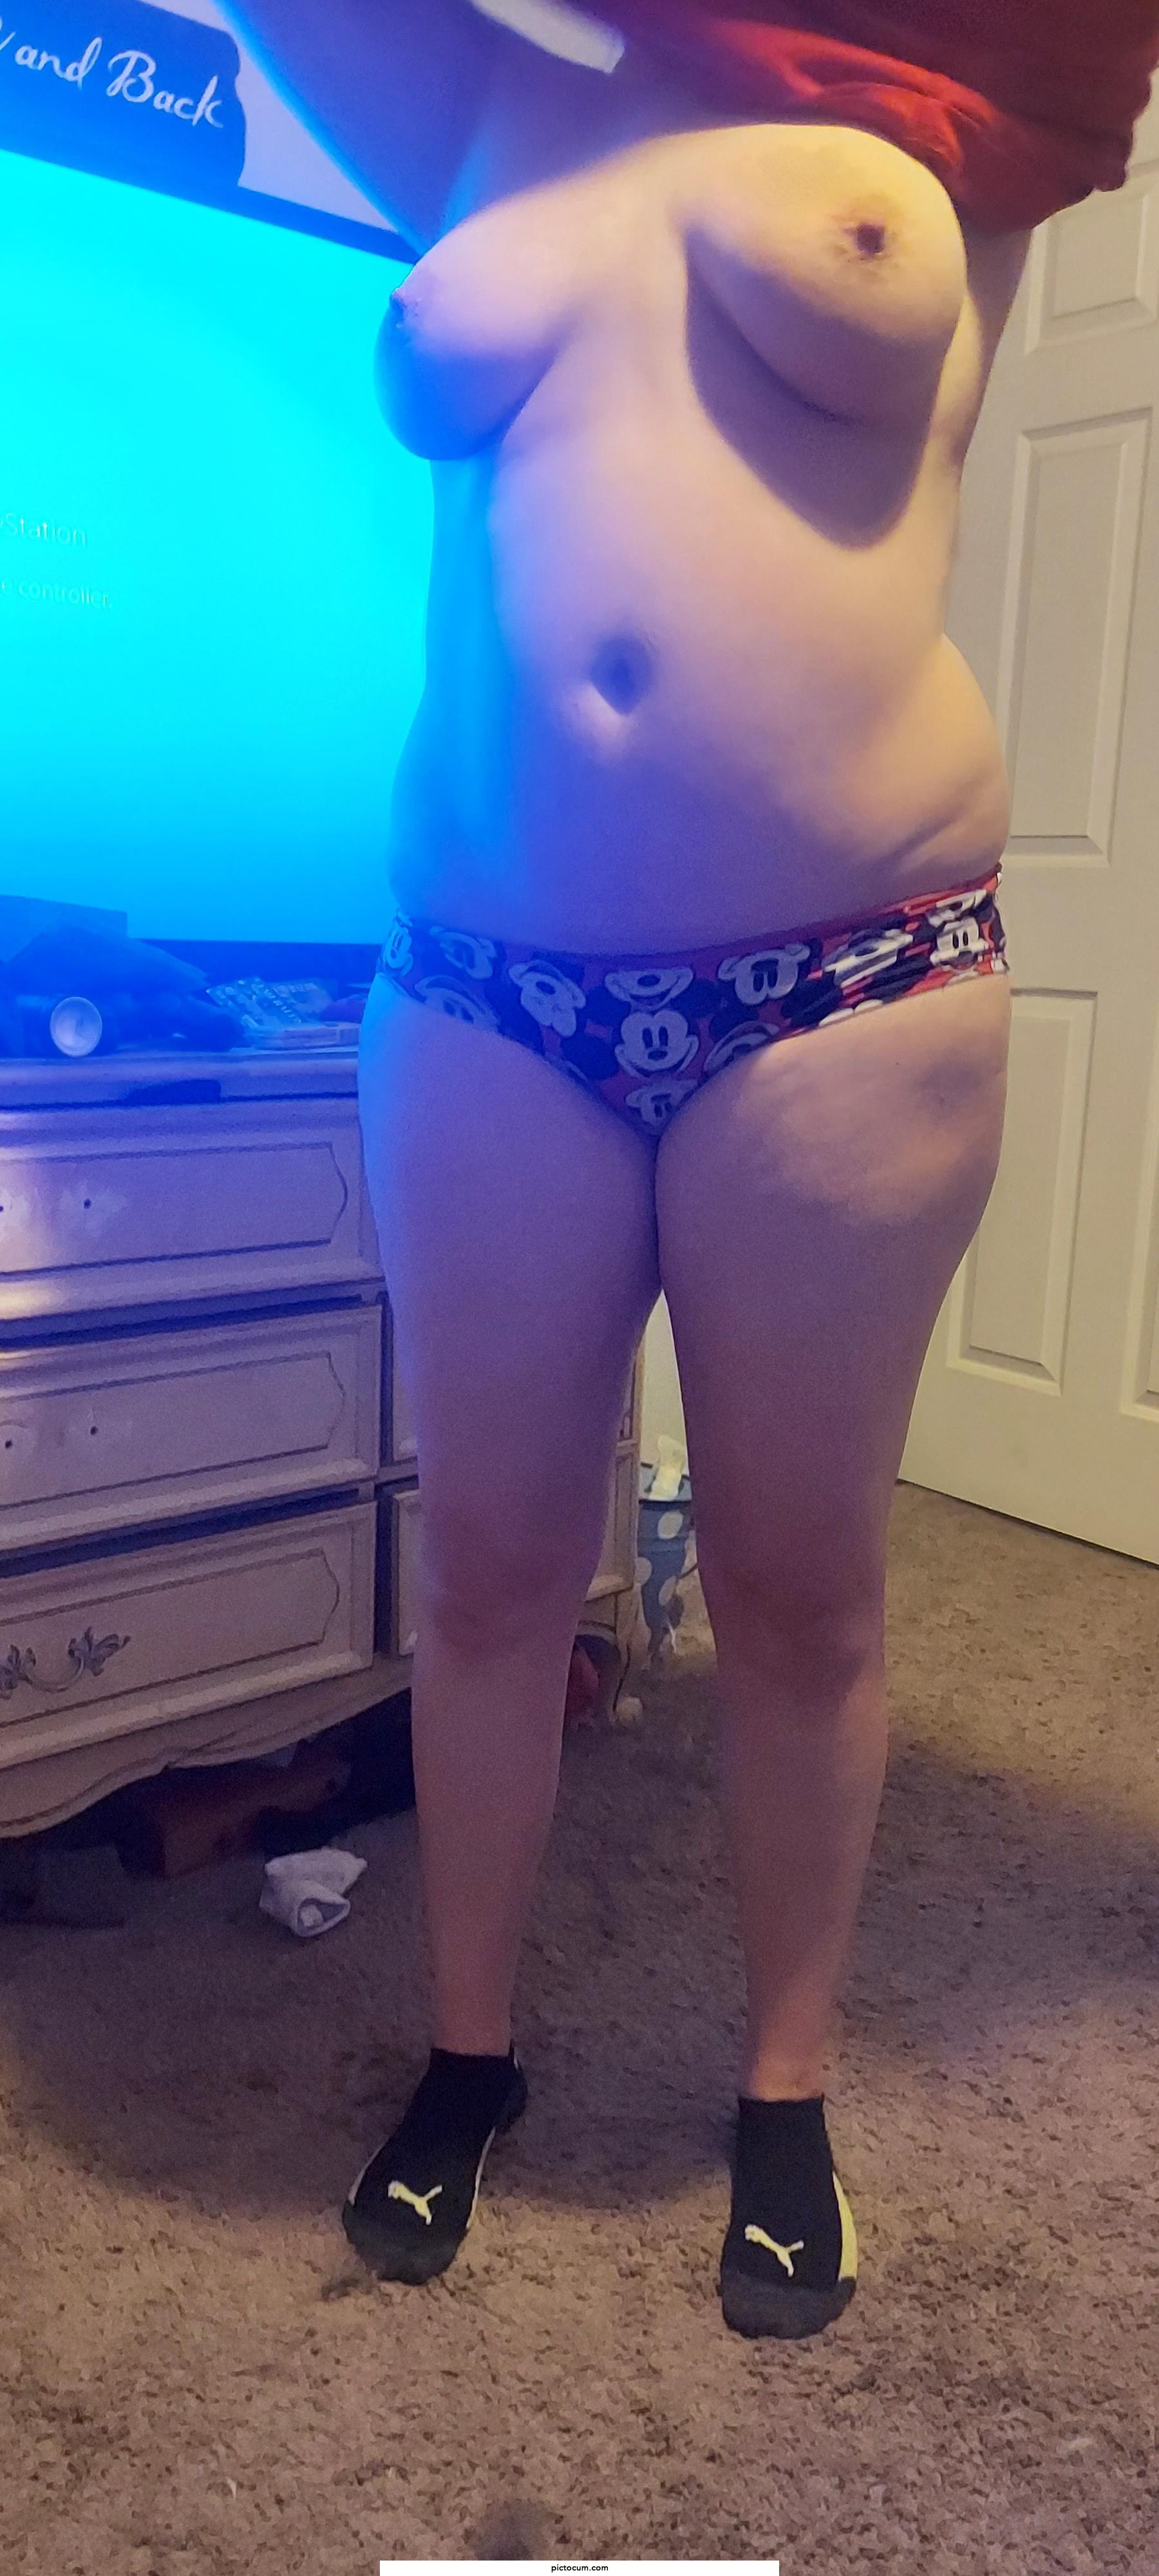 wife is wondering if you like her body